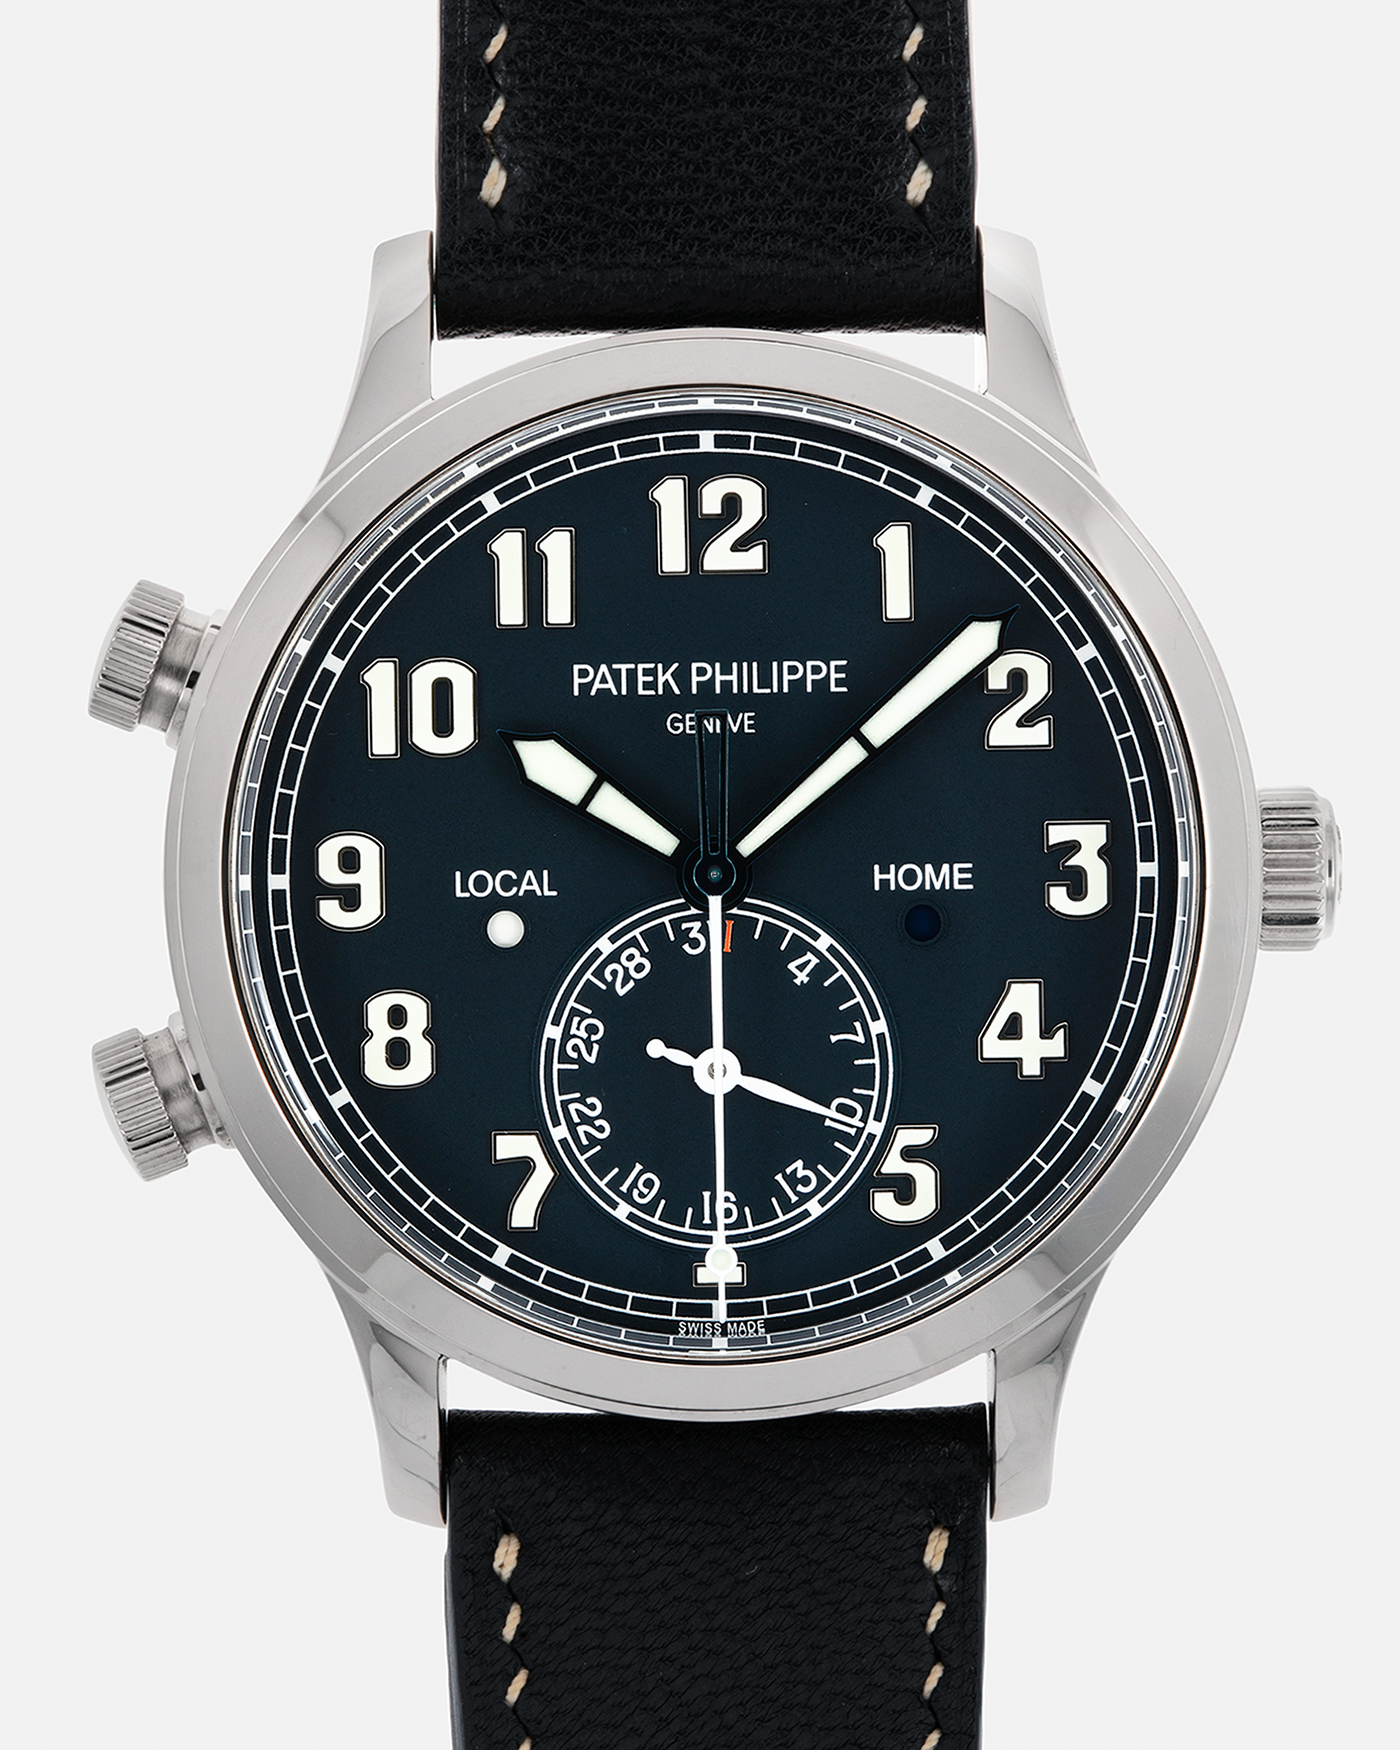 Brand: Patek Philippe Year: 2019 Model: Calatrava Pilot Travel Time Reference: 5524G Material: 18-carat White Gold Movement: Patek Philippe Cal. 324 S C FUS, Self-Winding Case Diameter: 42mm Lug Width: 22mm Strap: Patek Philippe Brown Leather Strap with Signed 18-carat White Gold Tang Buckle and Unbranded Custom Made Navy Blue Leather Strap